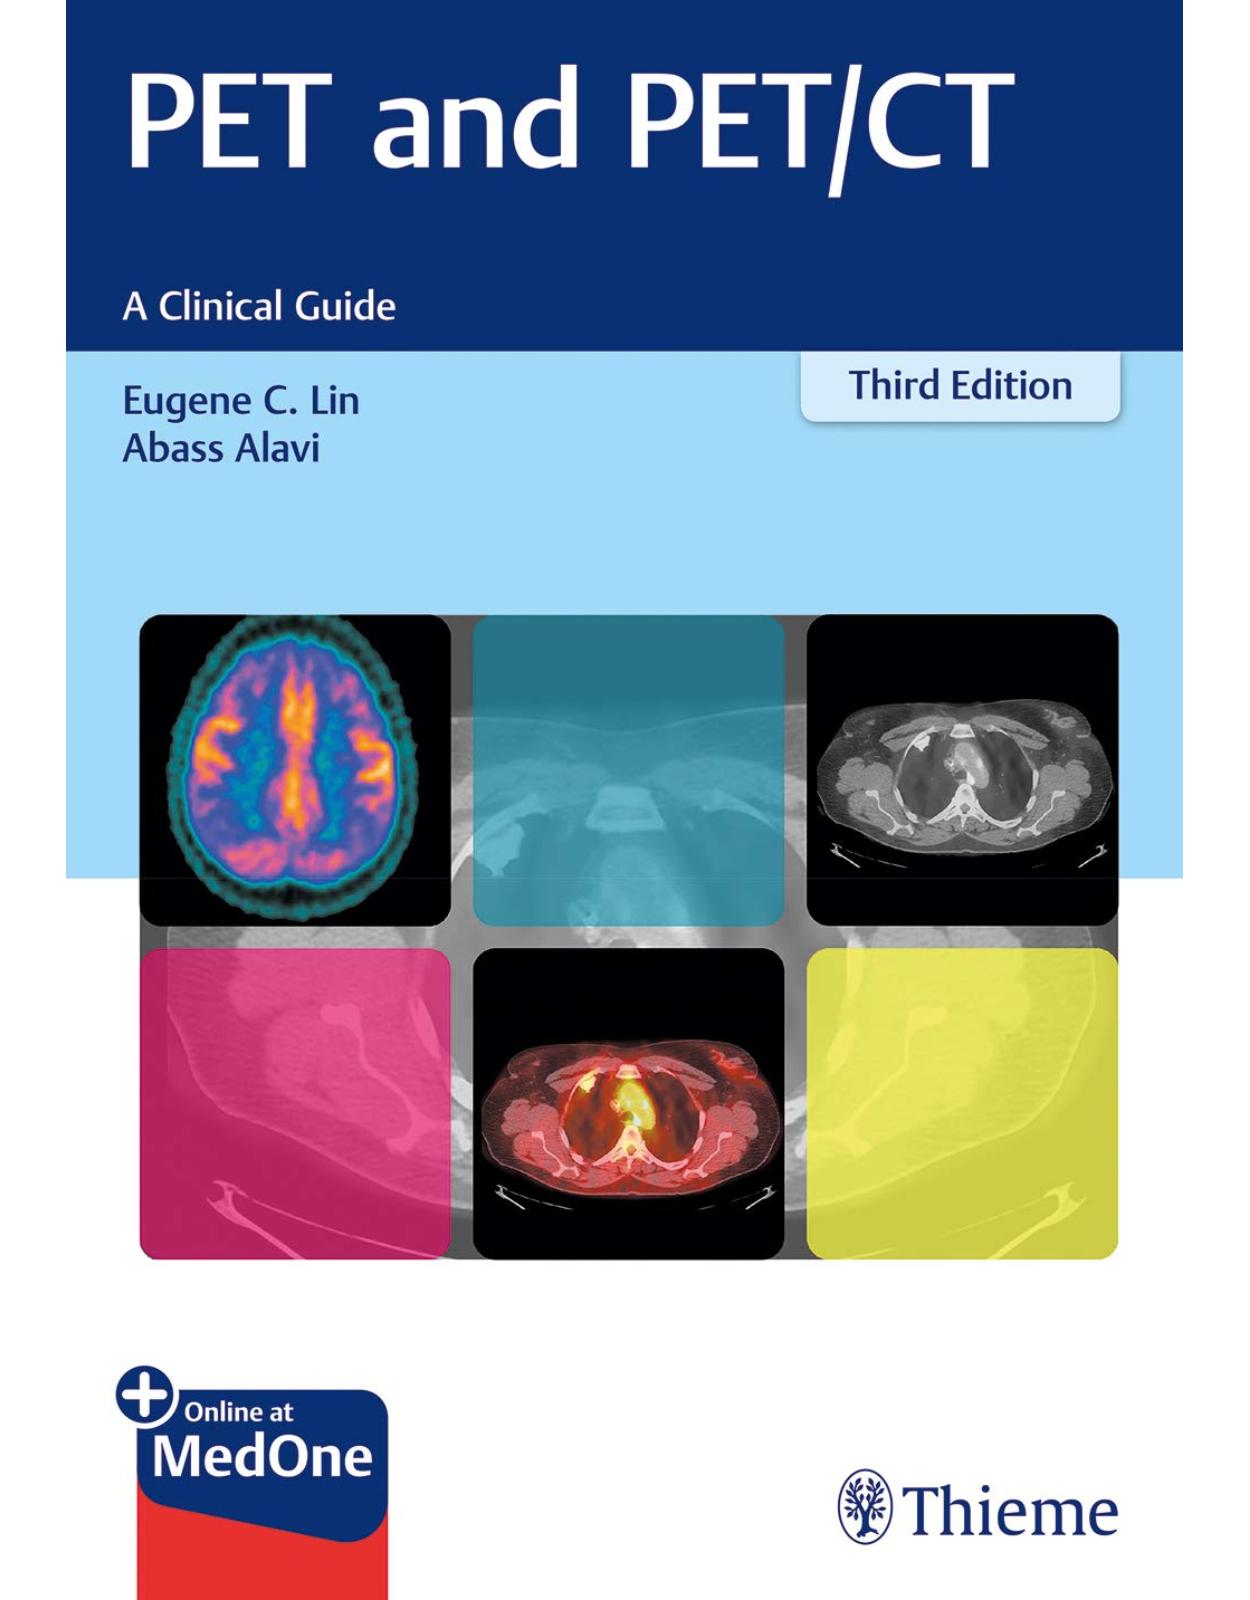 PET and PET/CT. A Clinical Guide